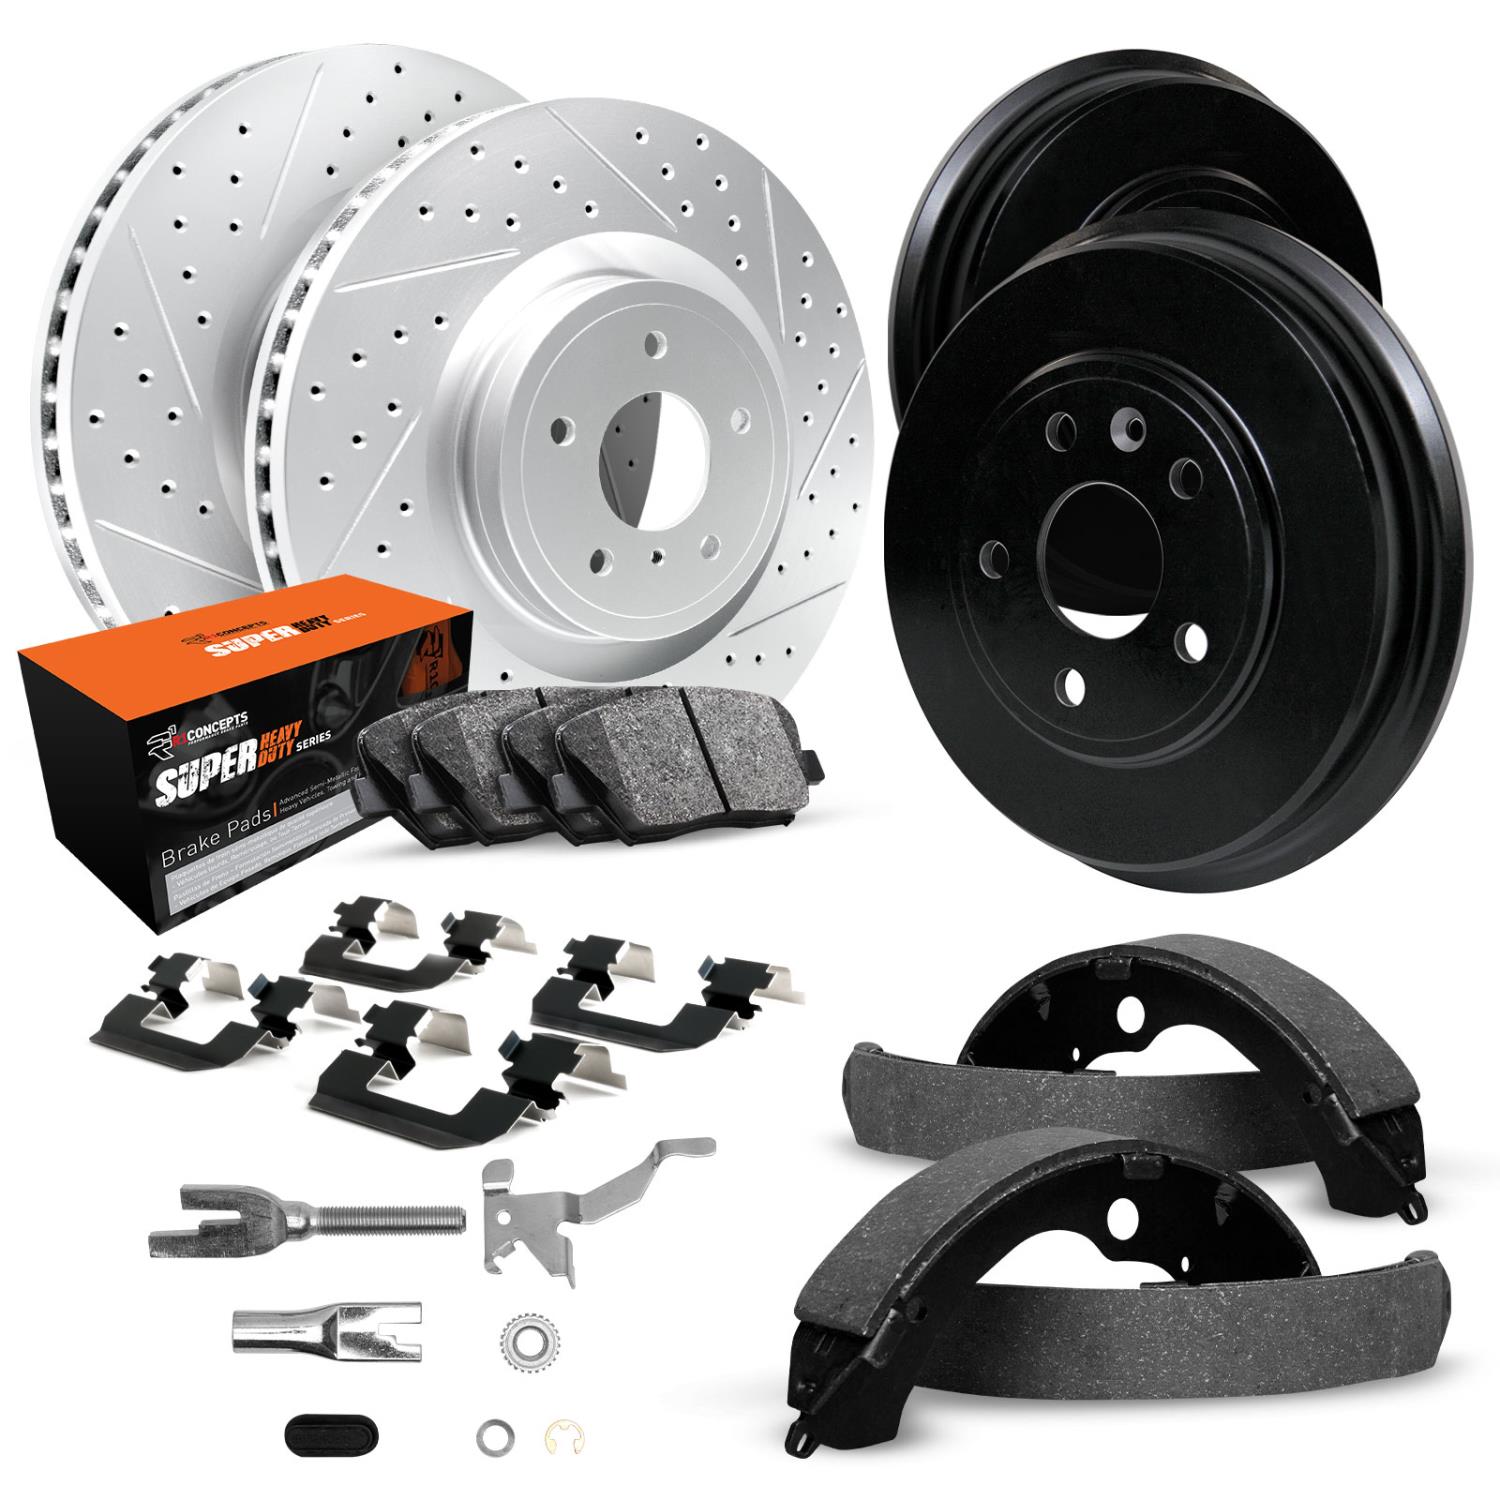 GEO-Carbon Drilled/Slotted Rotors/Drums w/Super-Duty Pads/Shoes/Hardware/Adjusters, 1991-1996 GM, Position: Front/Rear